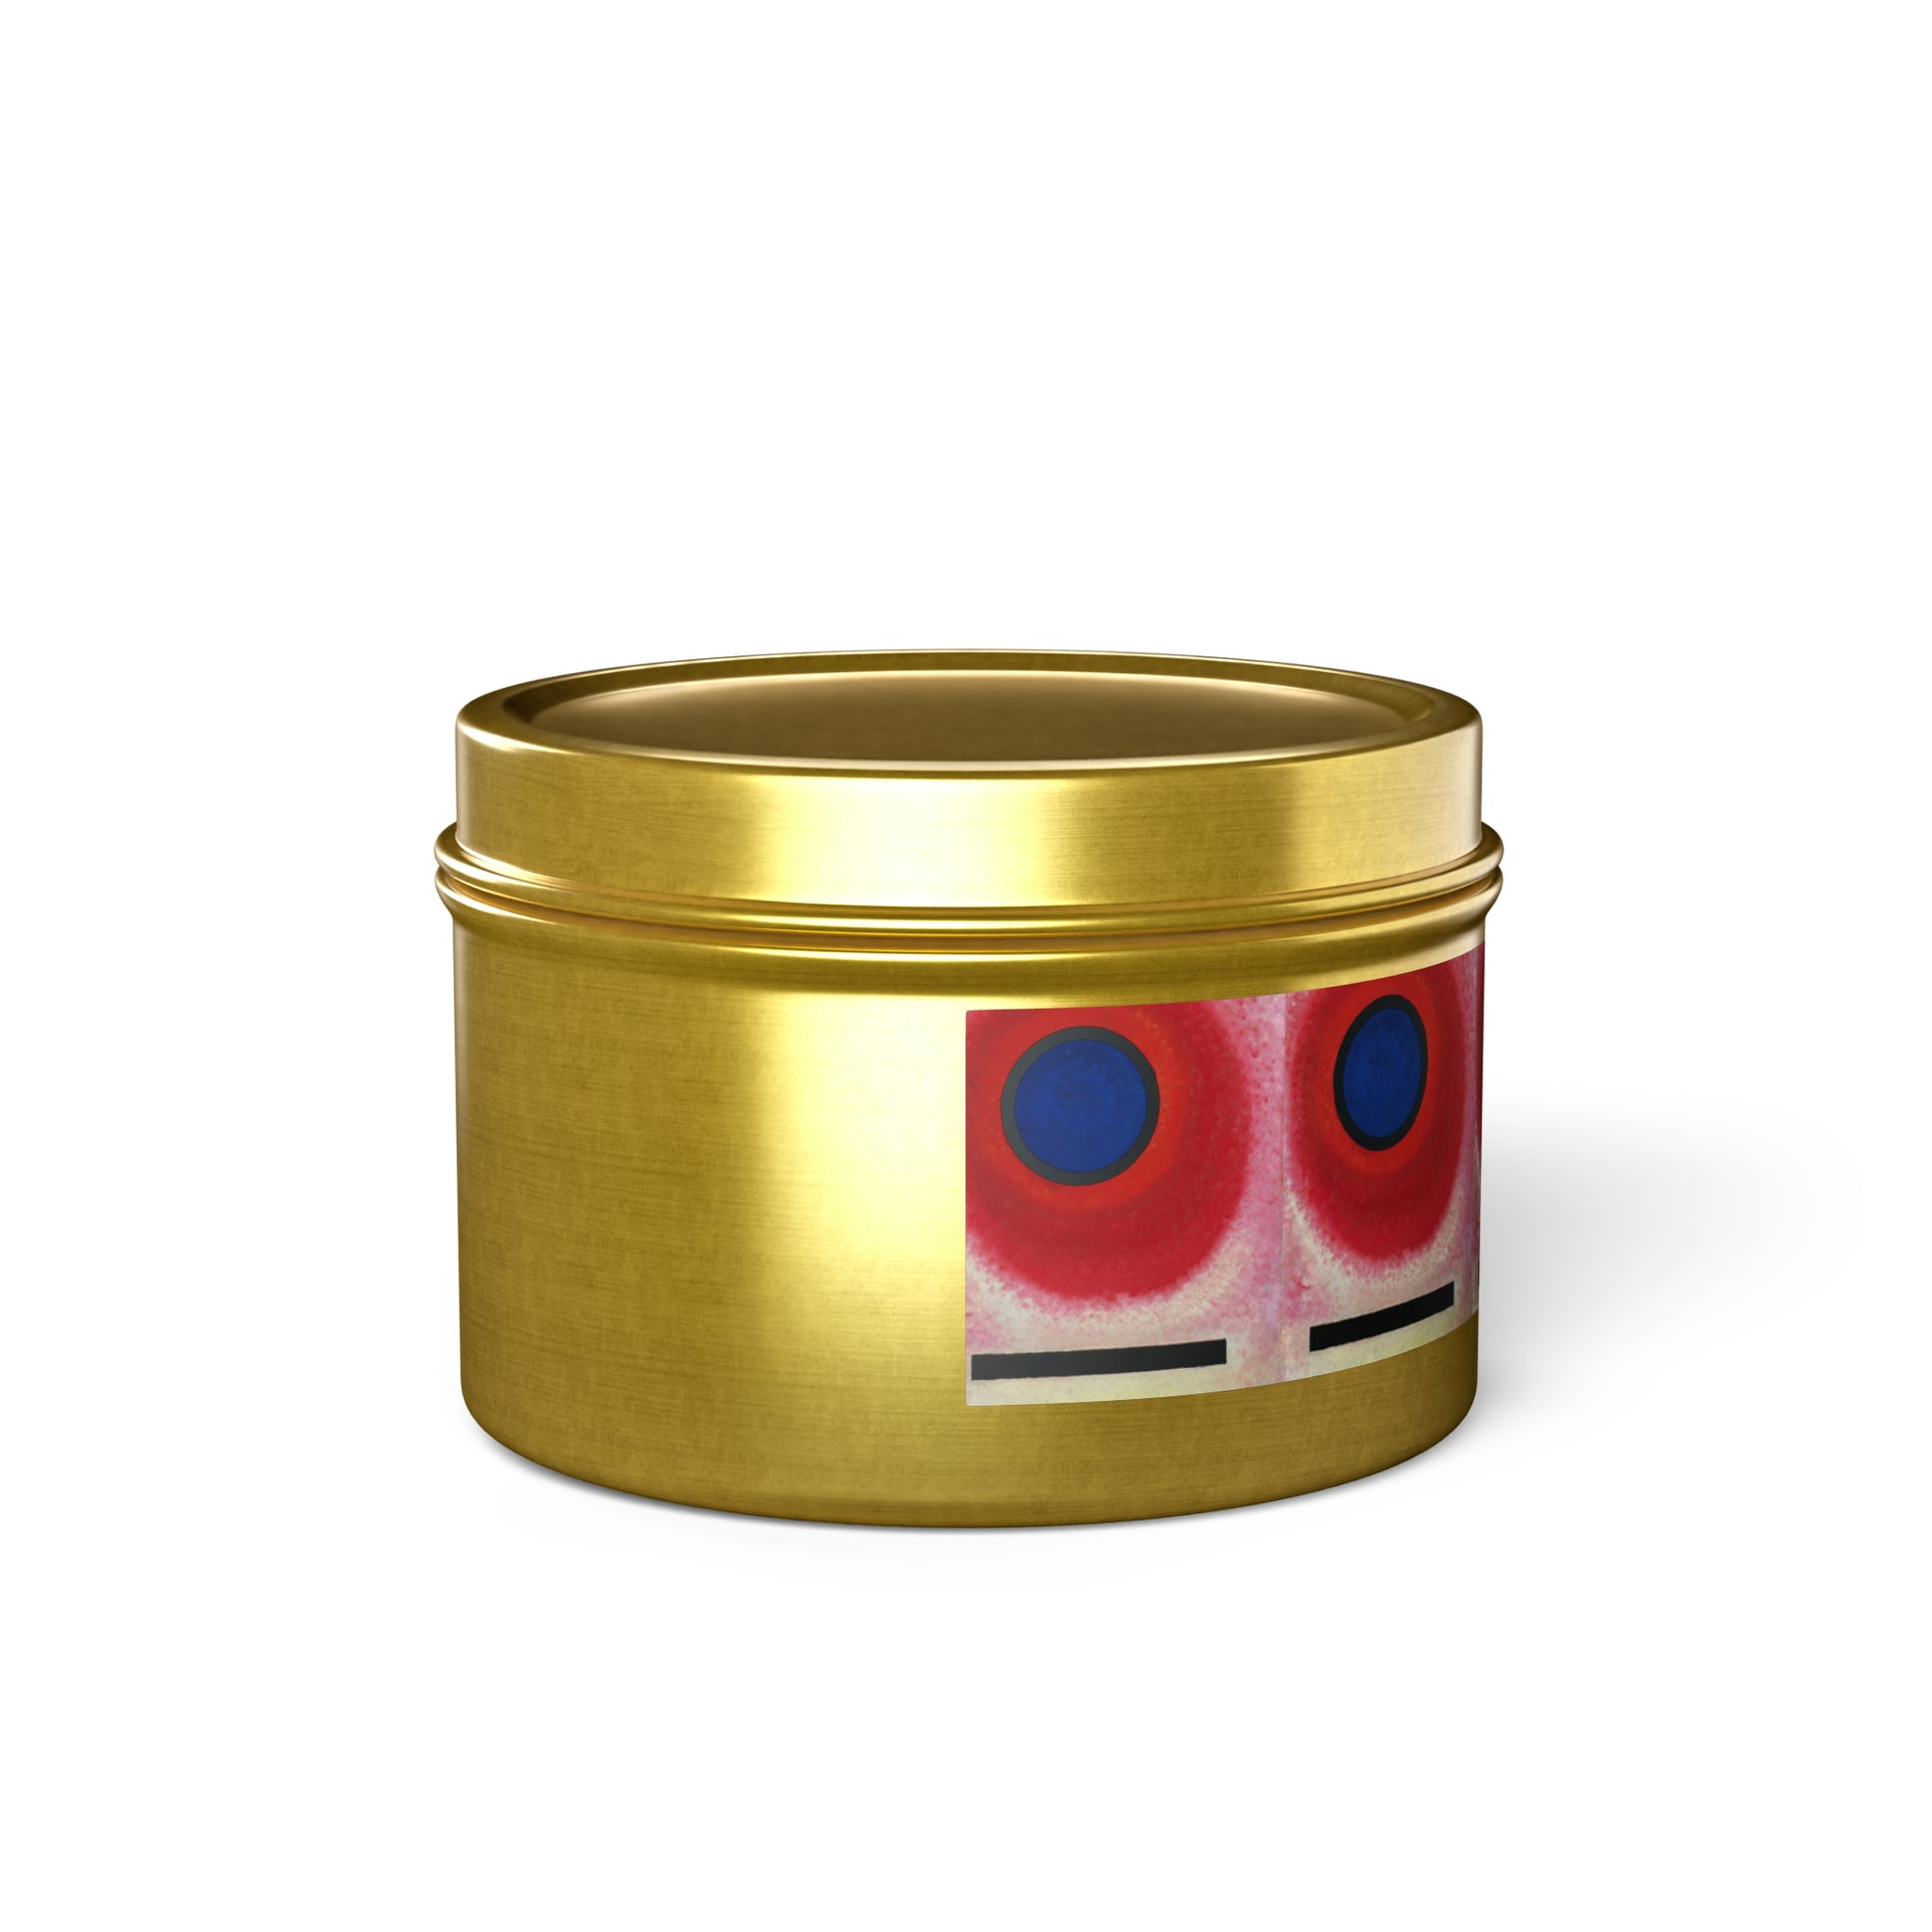 a gold tin with a red and blue design on it